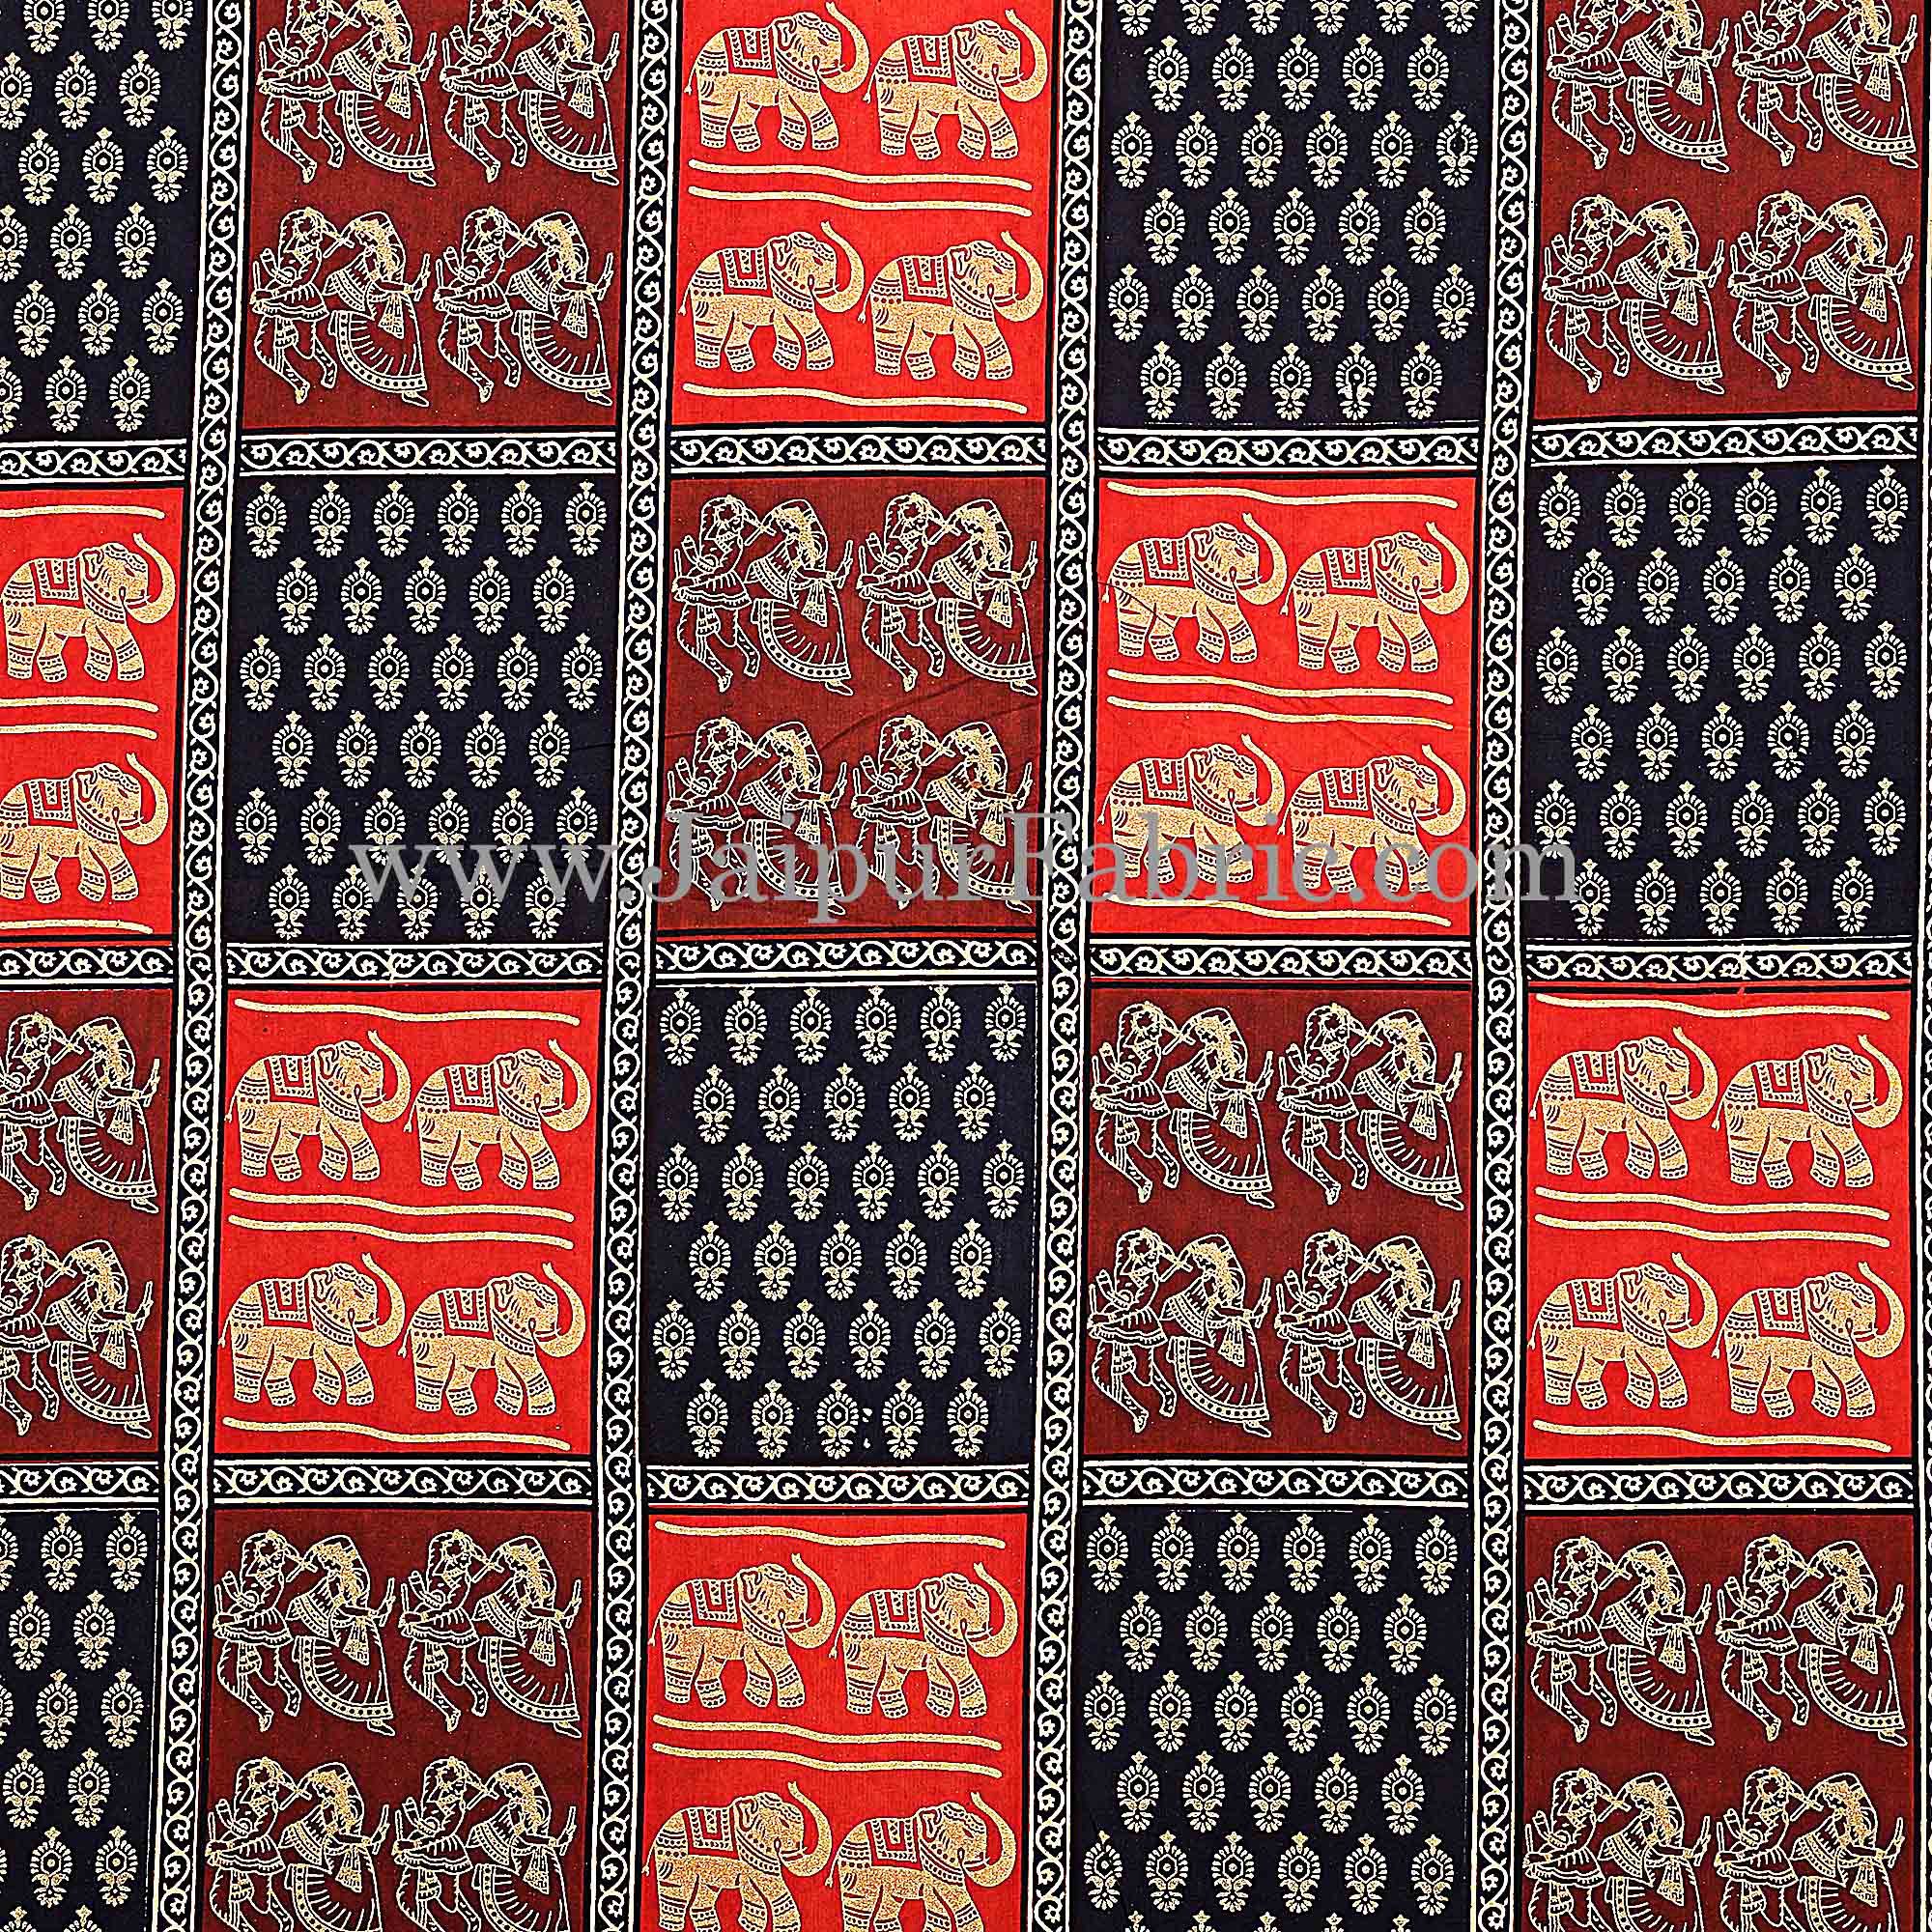 Black Border checkered  With Elephant And Dandiya  Pattern  Golden Print Super fine Cotton  Double Bed Sheet